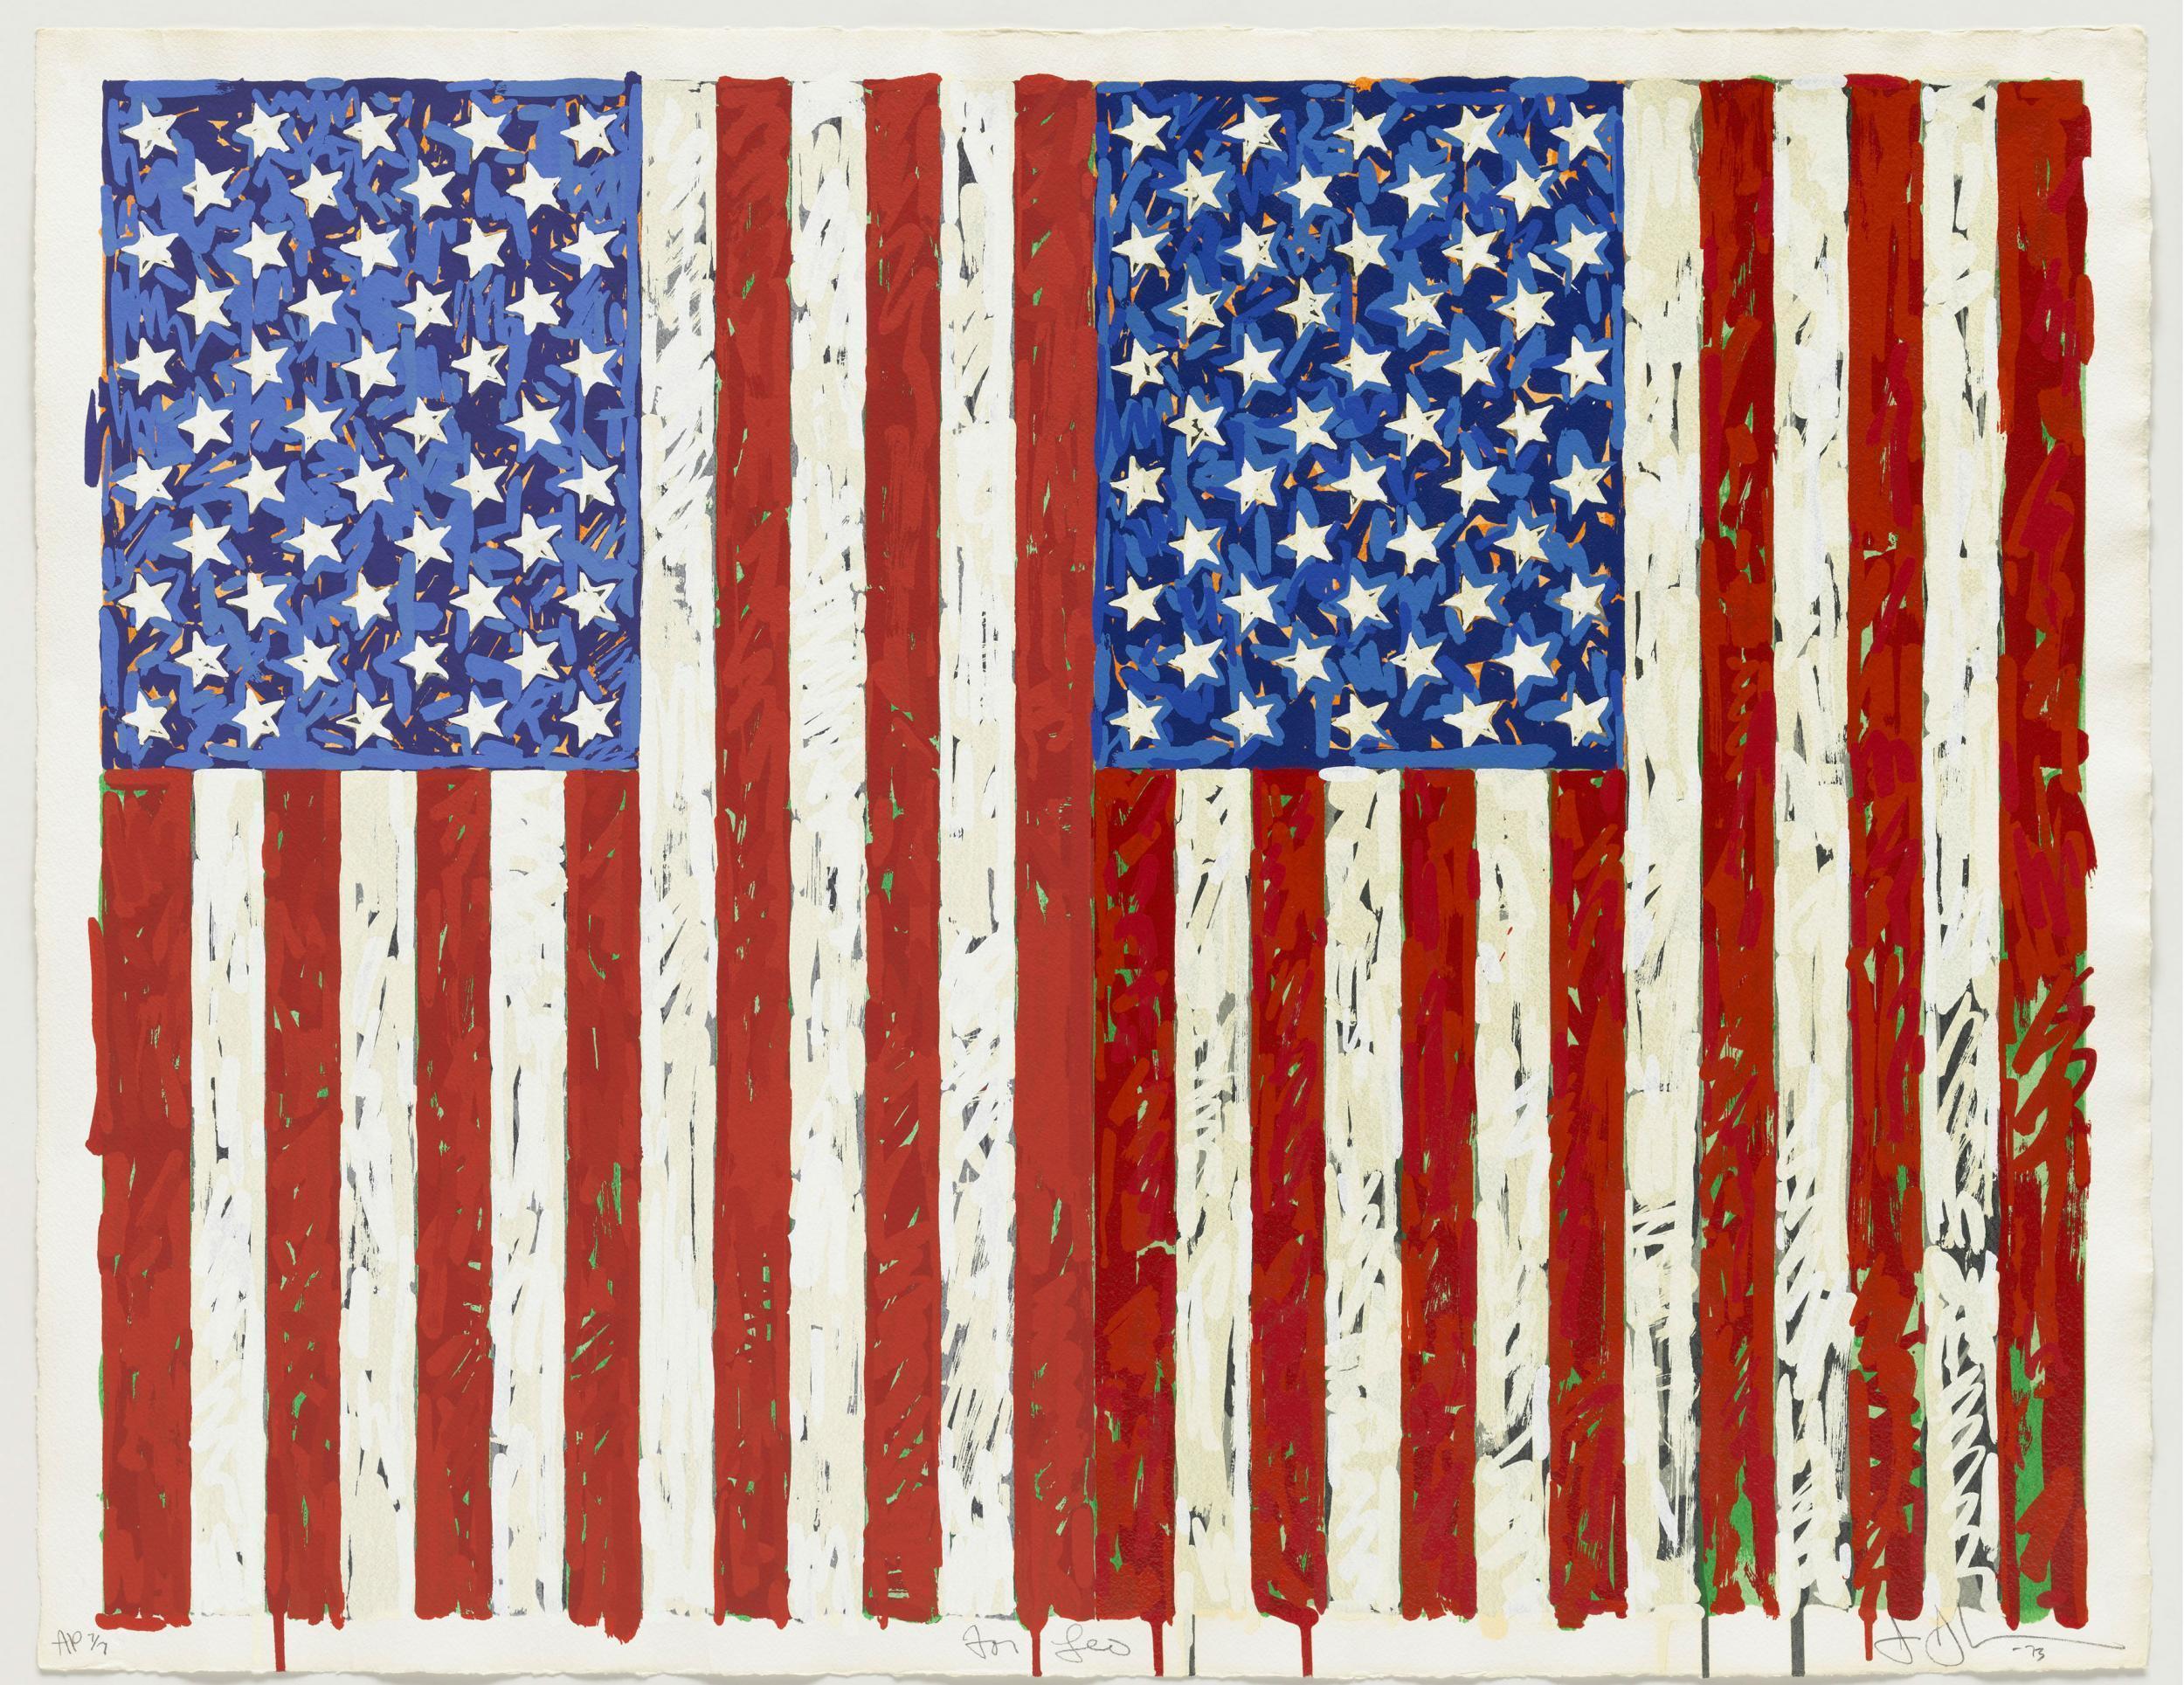 Jasper Johns’s ‘Flags I’, created in 1973, is widely regarded as a masterpiece in printmaking